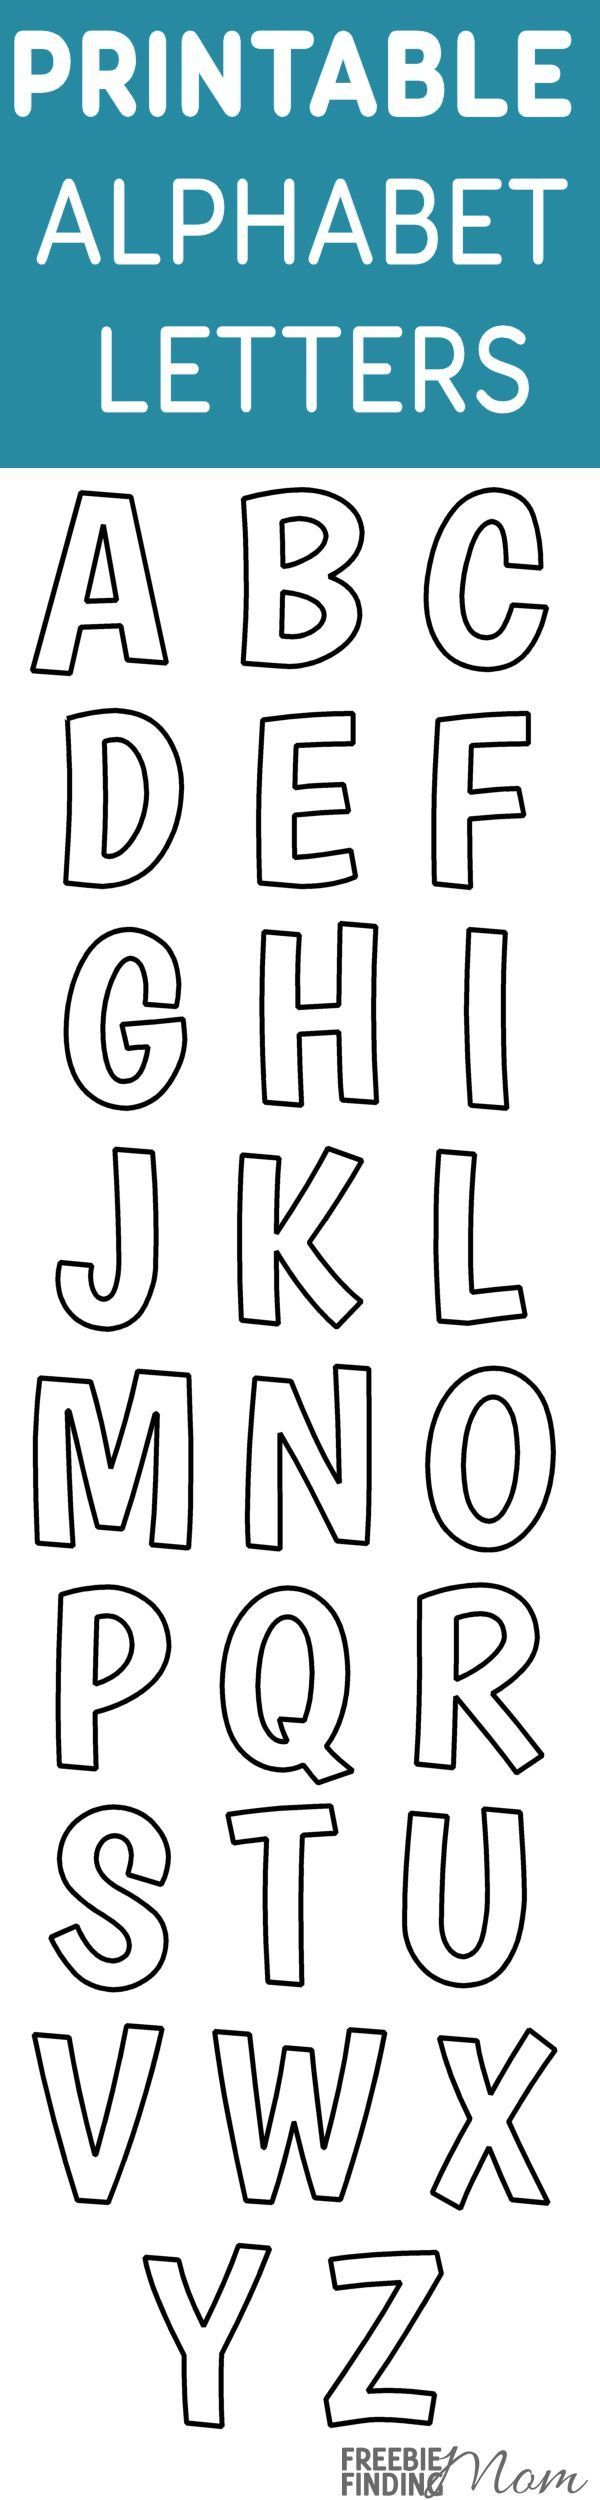 Printable Alphabet Templates For Kids intended for Free Printable Alphabet Stencils Templates